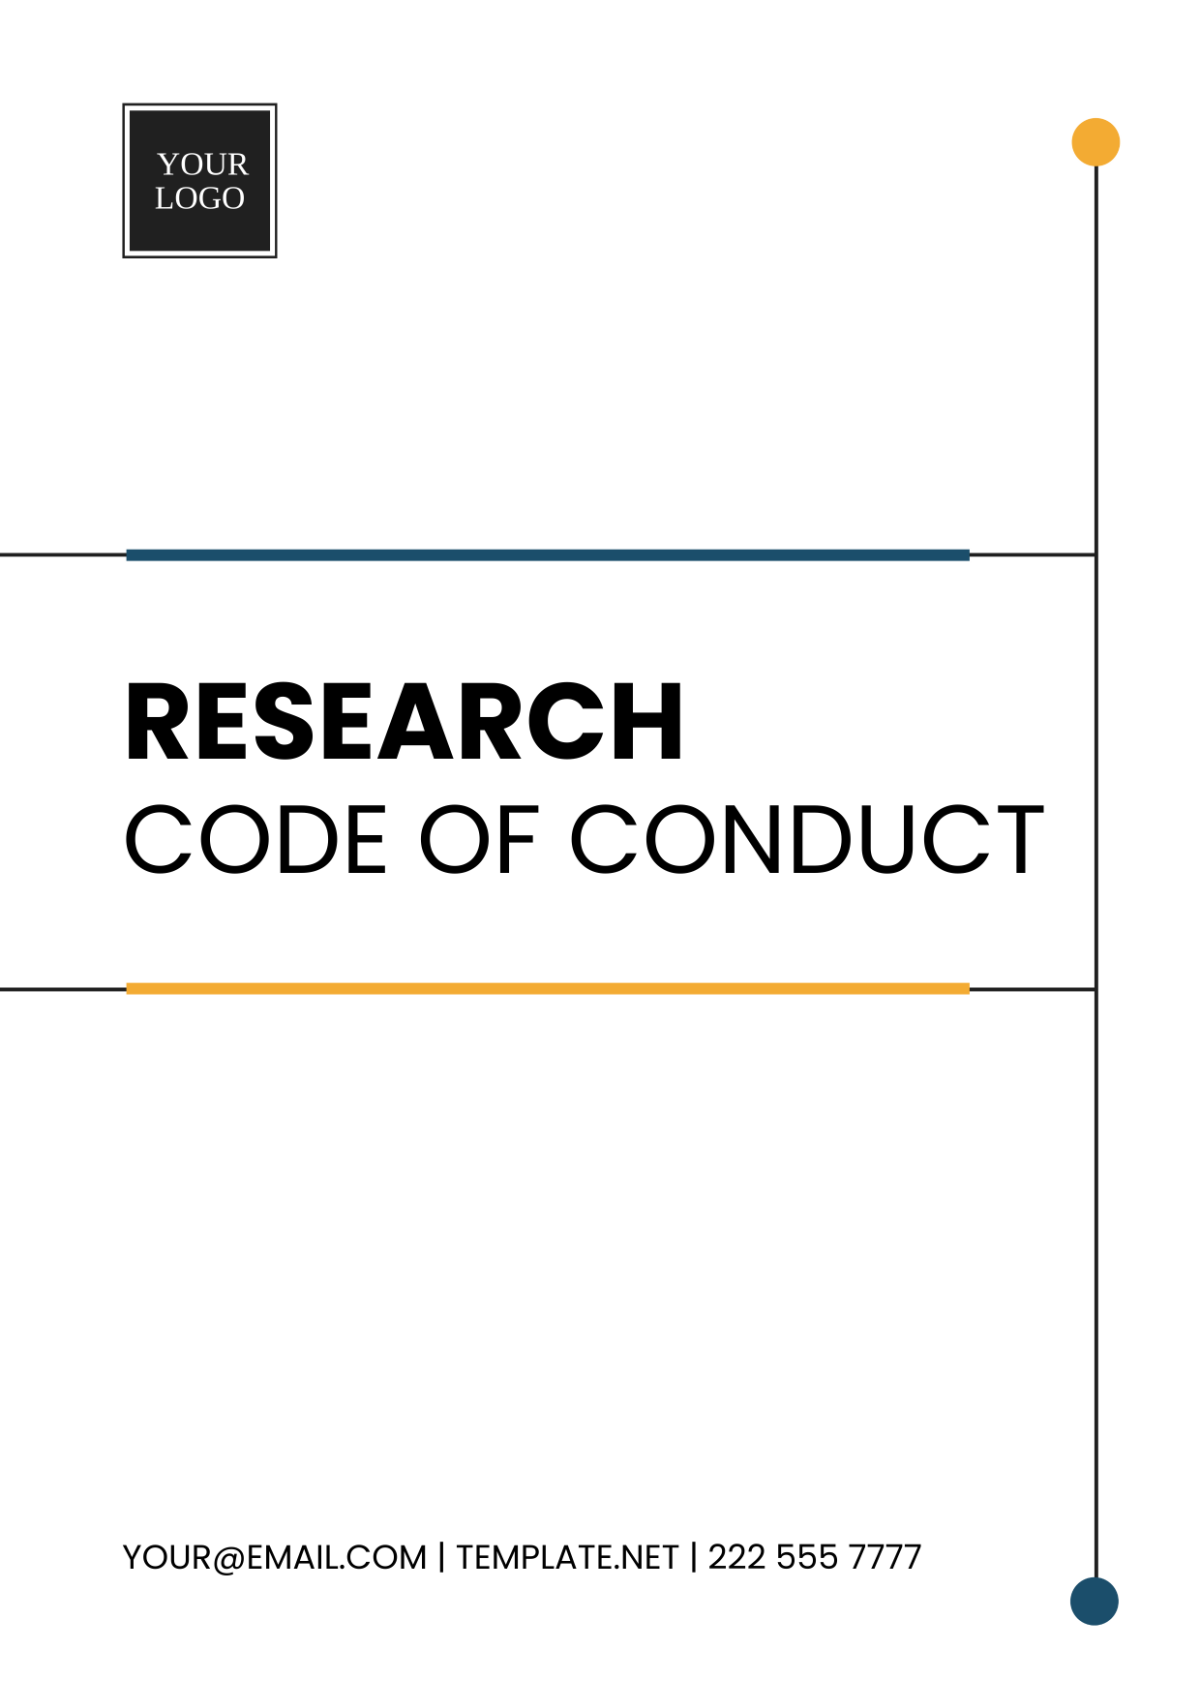 Research Code of Conduct Template